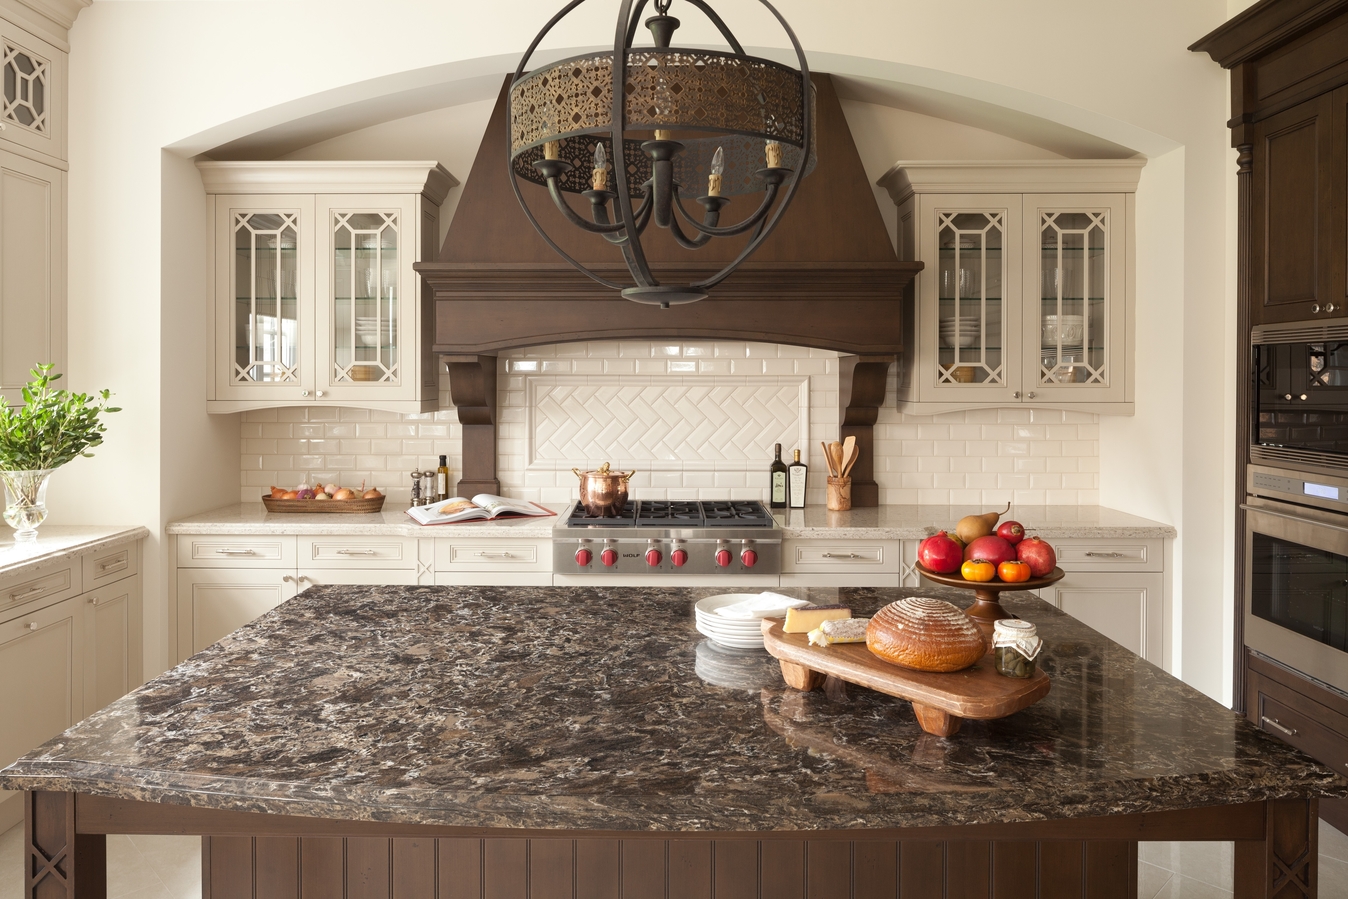 Granite vs. Quartz: Is One Better Than The Other?